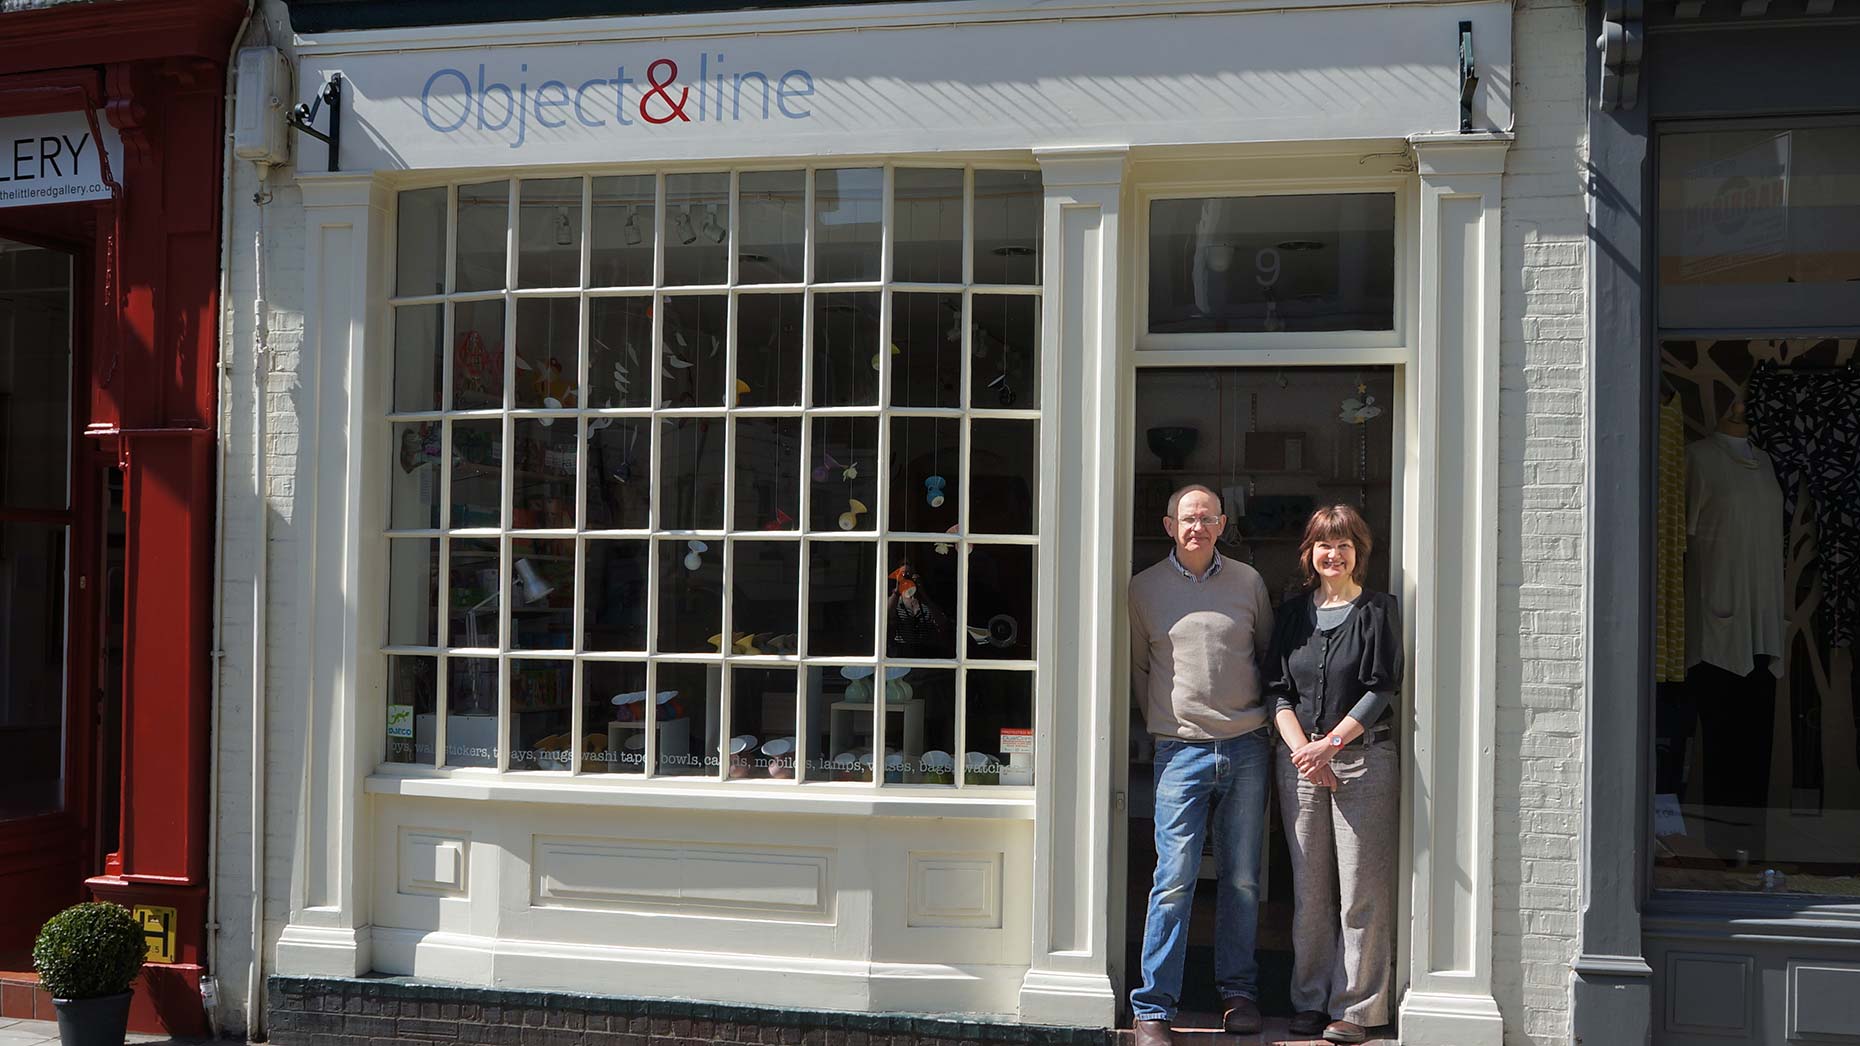 Object & Line owners Barry and Jill Hepton opened in 2010.